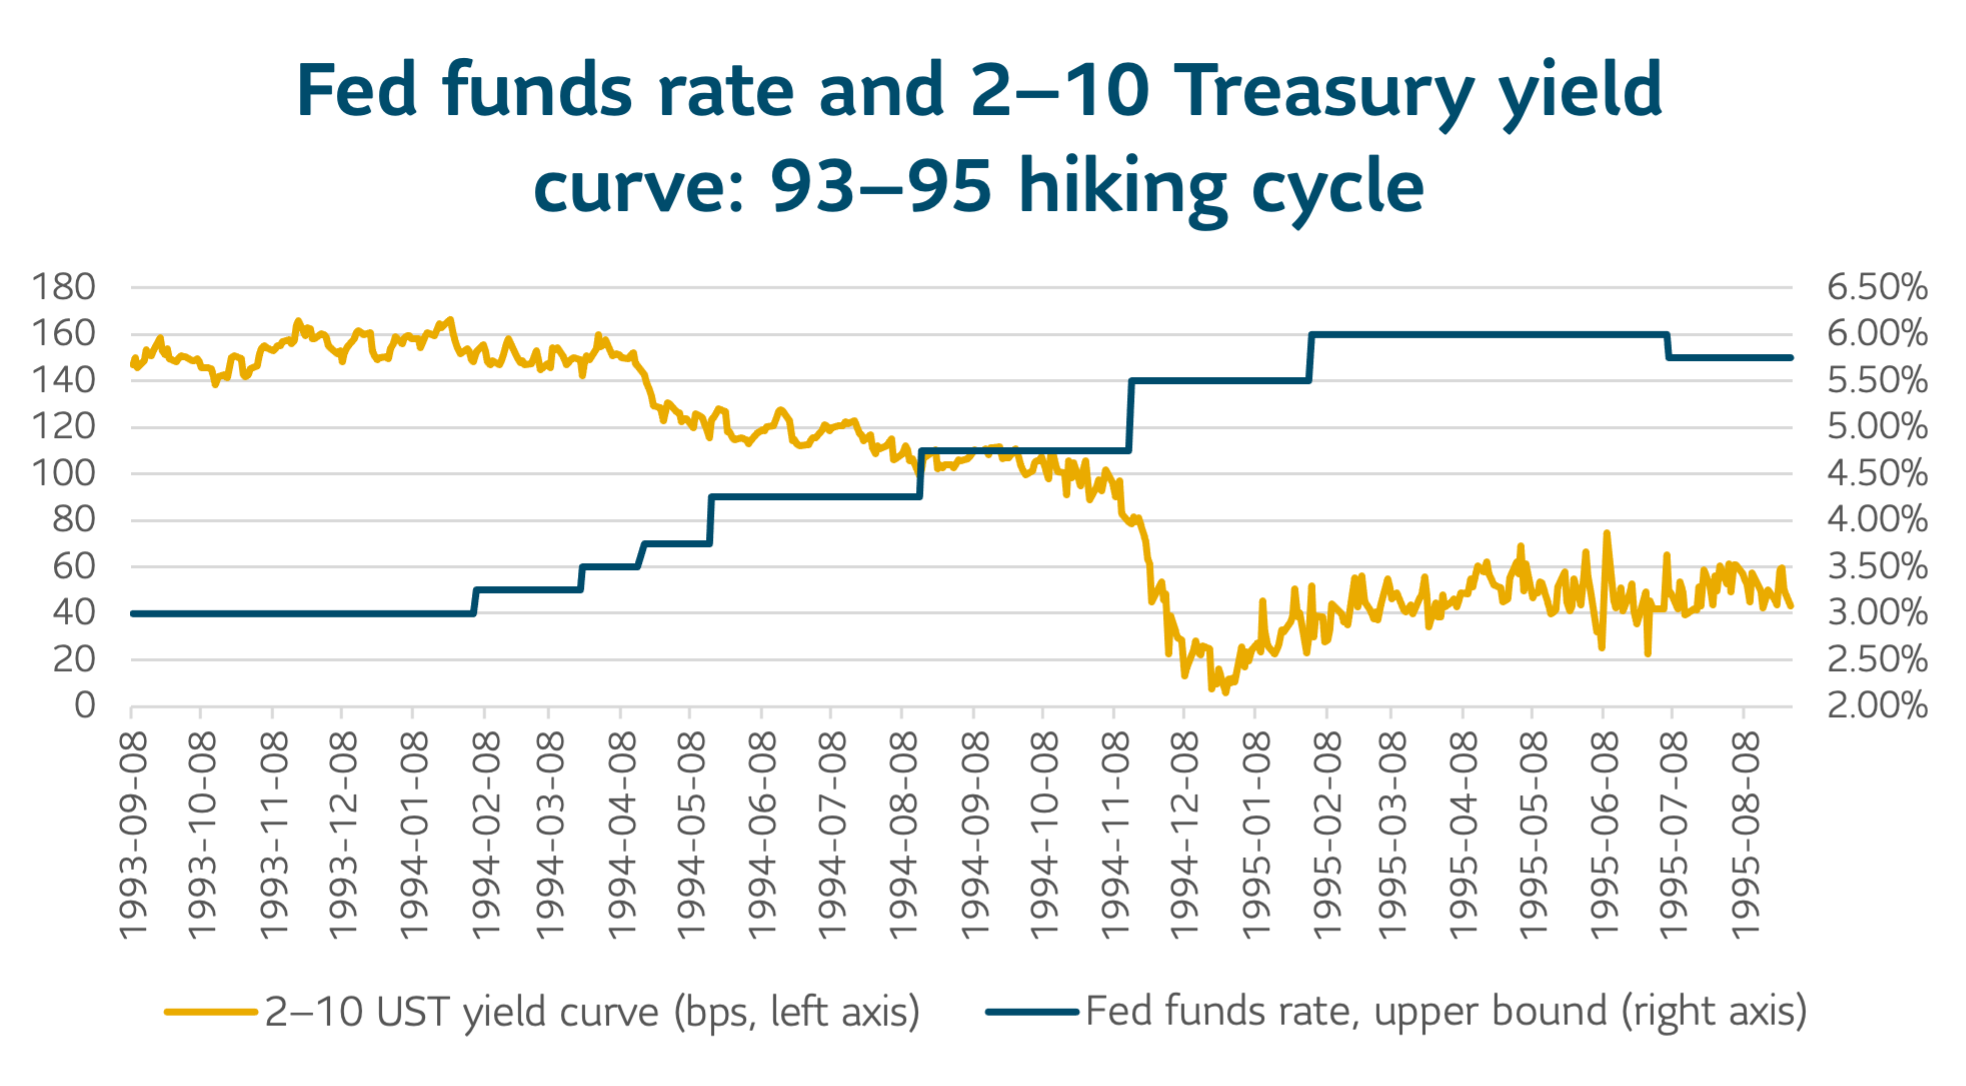 Fed funds rate and 2-10 Treasury yield curve: 93-95 hiking cycle